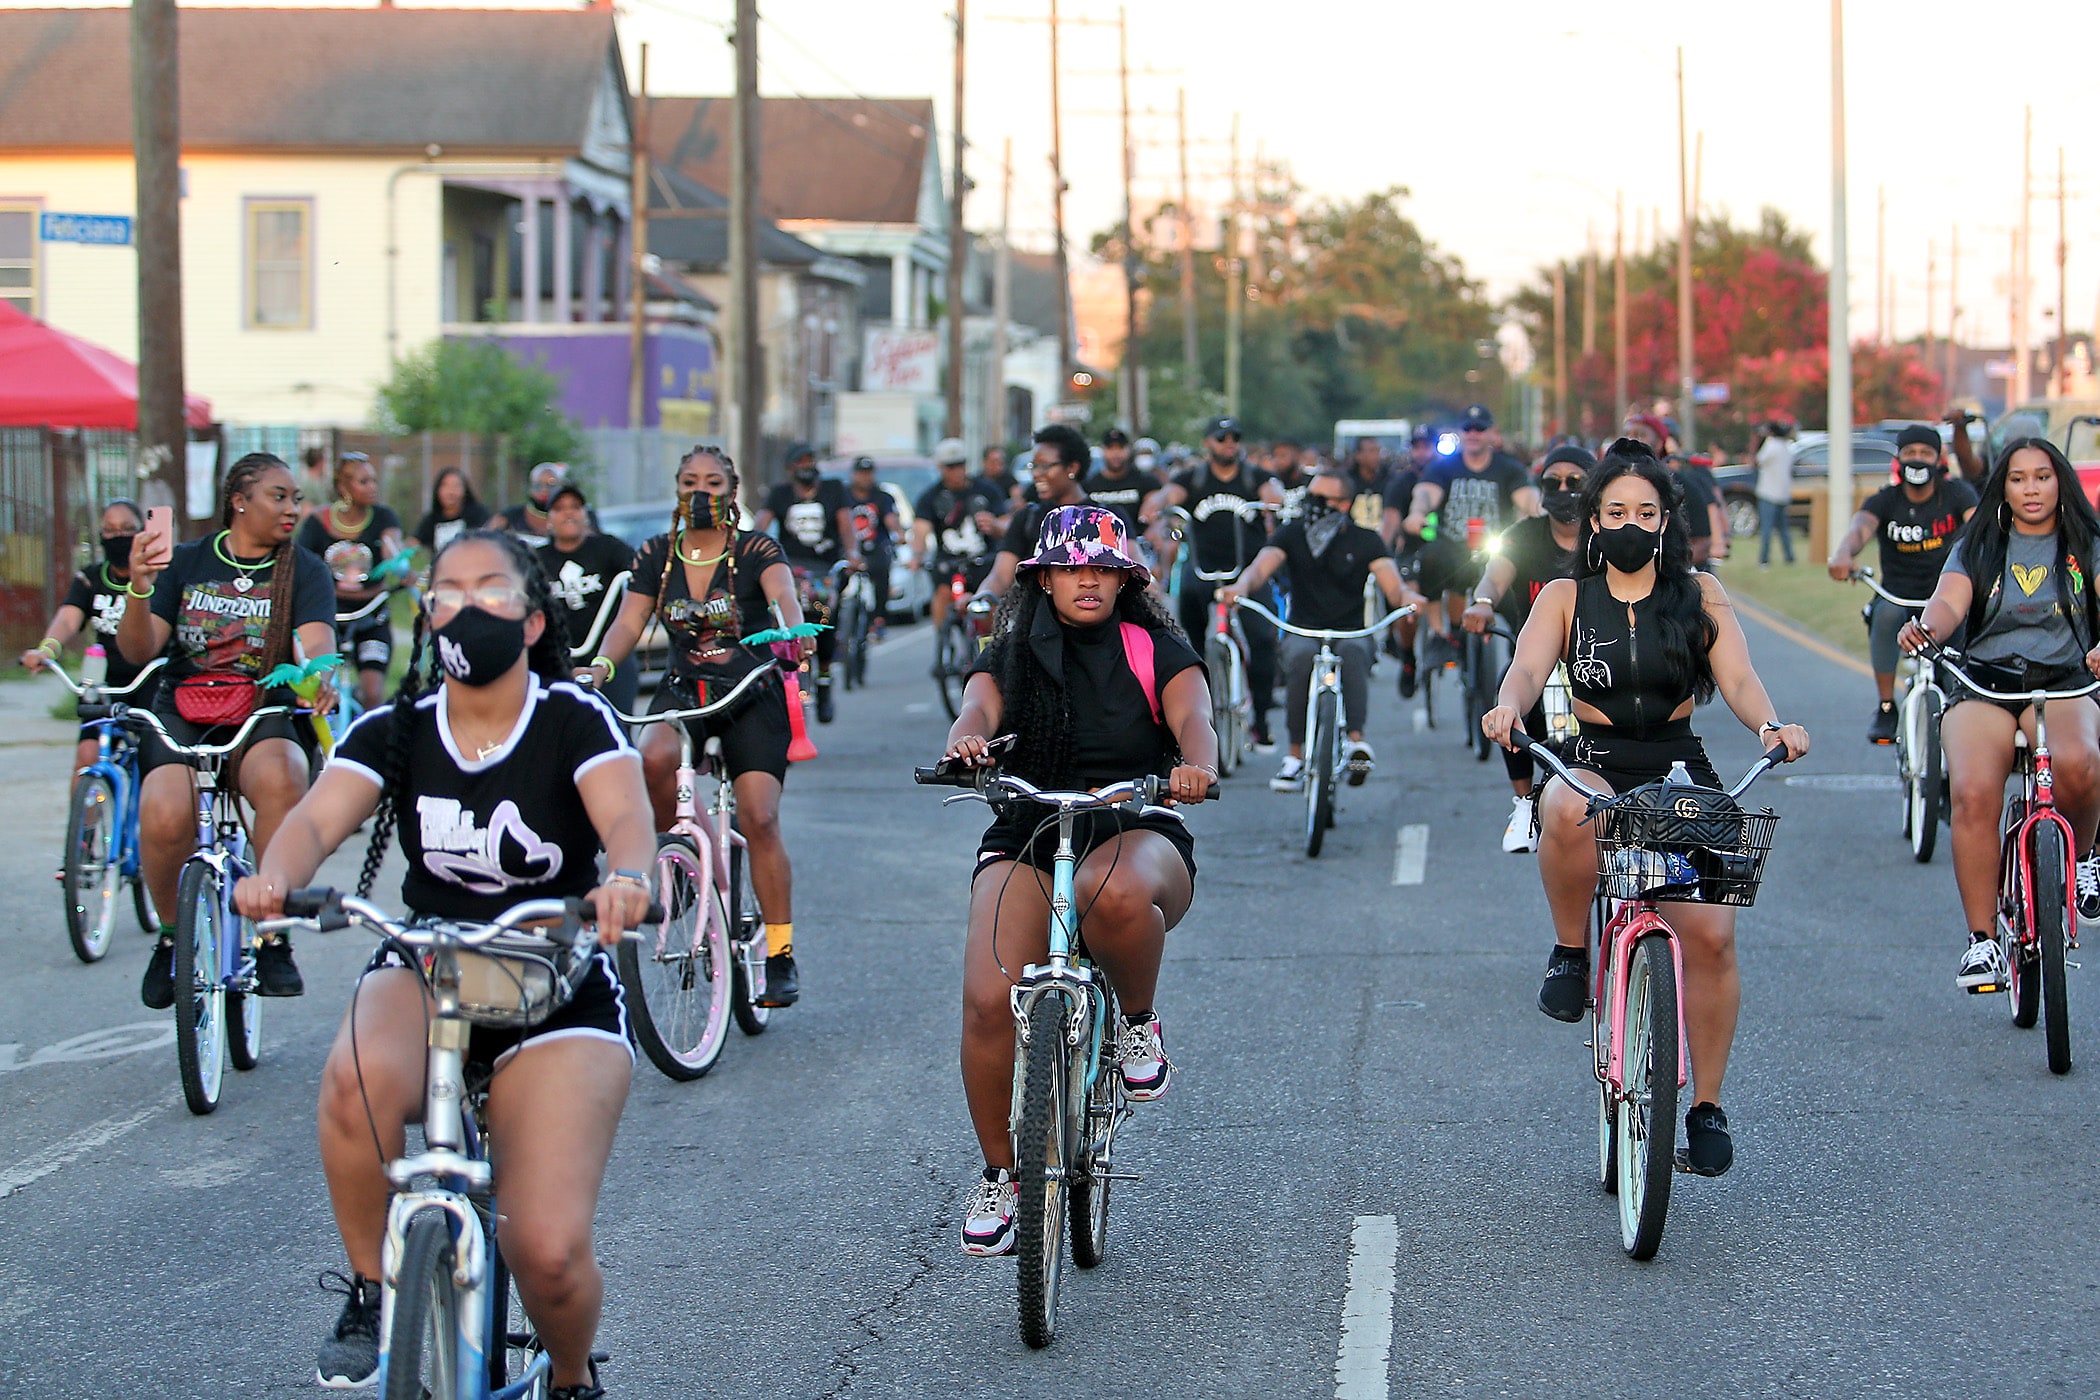 Riders make their way down St. Claude Avenue during the Juneteenth Blackout Bike Ride which began in the 3100 block of St. Claude Avenue and made pit-stops at several Black-owned businesses. The ride was one of several local and national events marking Juneteenth, the day in 1865 when slaves in Galveston, Texas finally learned they had been freed. Photographed on Friday, June 19, 2020. (Photo by Michael DeMocker)